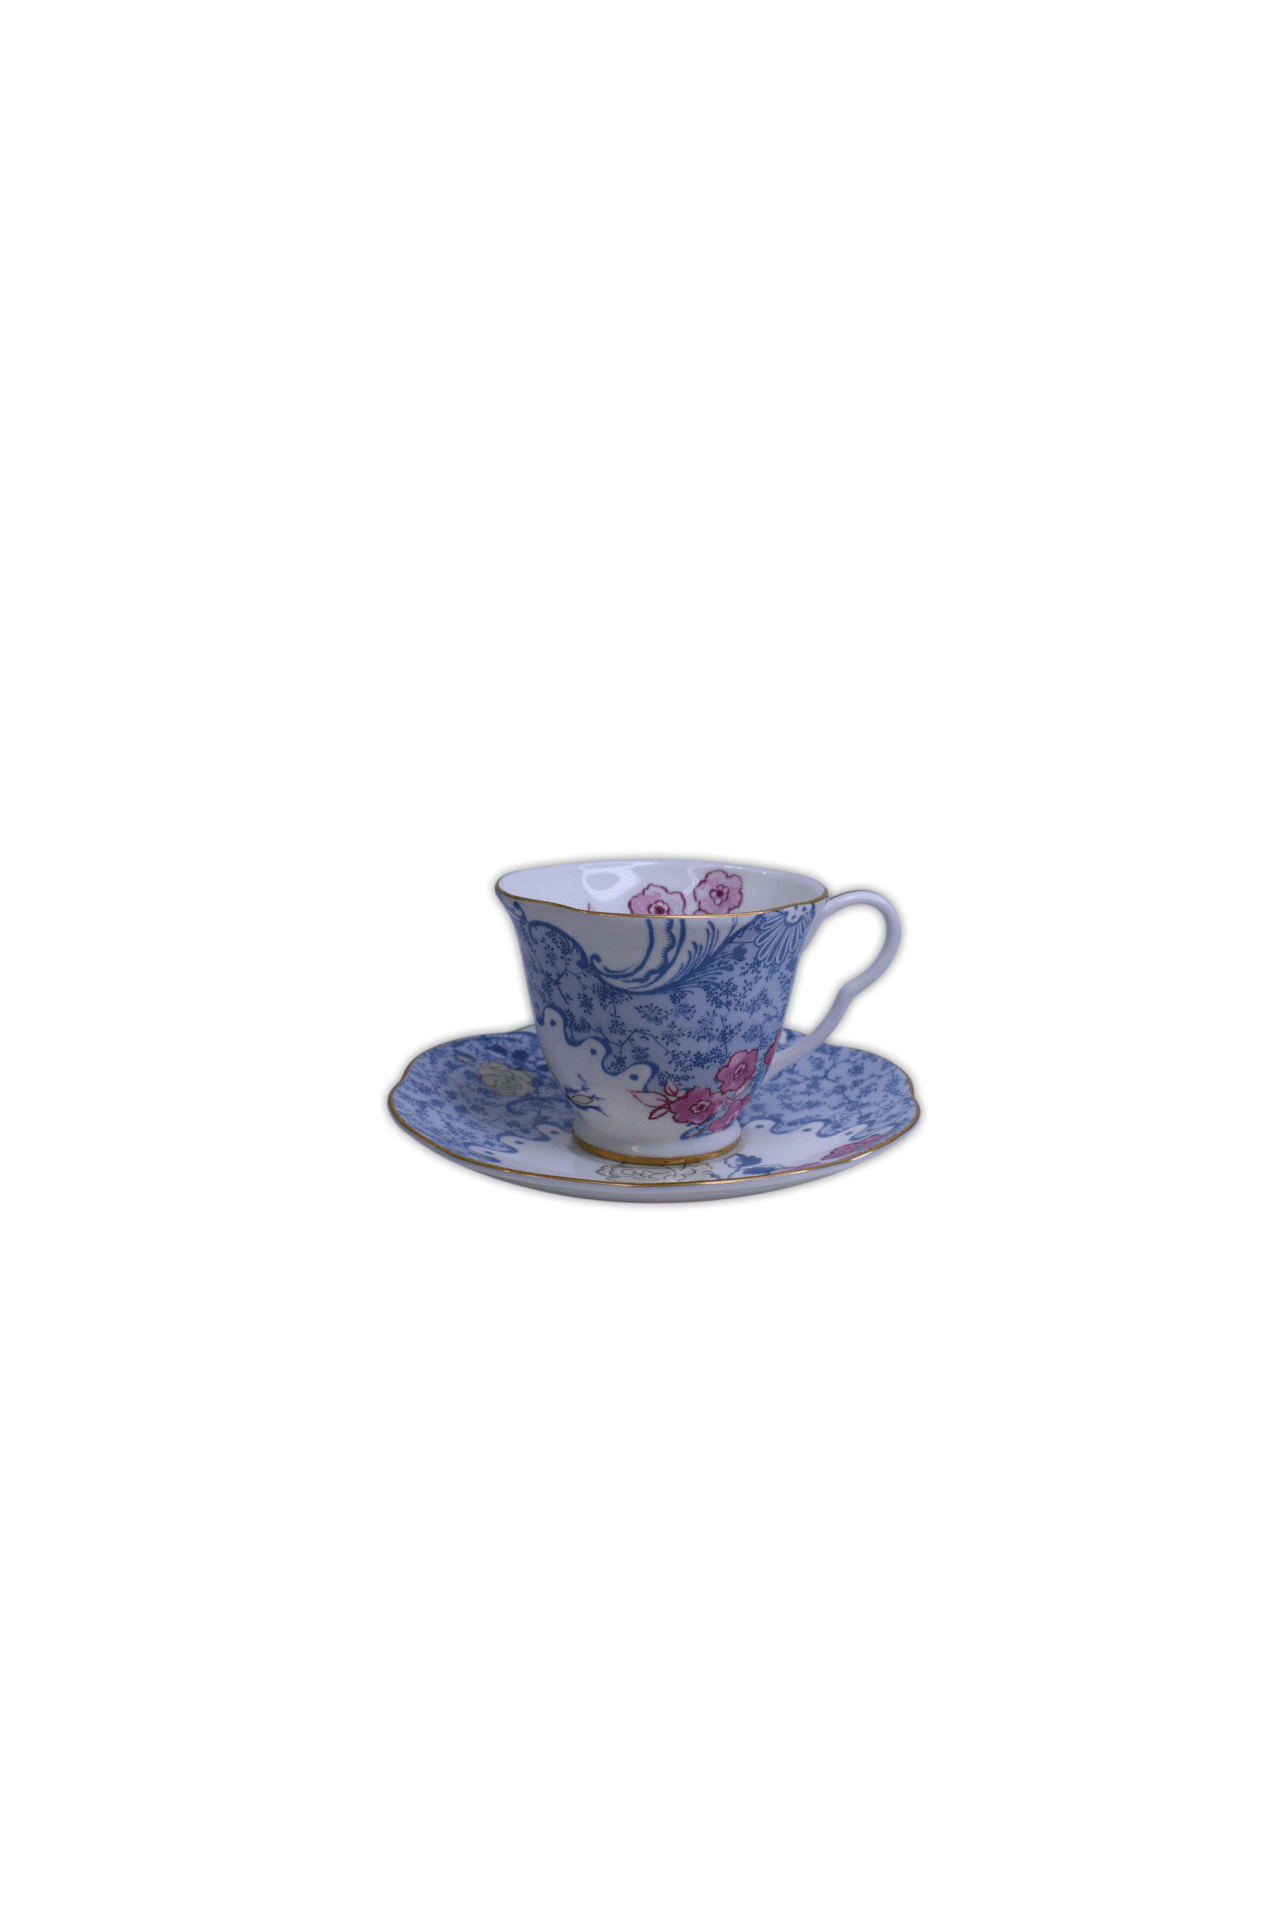 Enjoy the invigorating feeling of the year's first flowers, whatever the season, with this Spring Blossom teacup and saucer from our Butterfly Bloom collection. Transport yourself to a country garden as you sip your tea from the pink, white and cornflower-blue cup with its delicate floral pattern. It features a luxuriant gilded finish on the rims and elegantly arched handle.